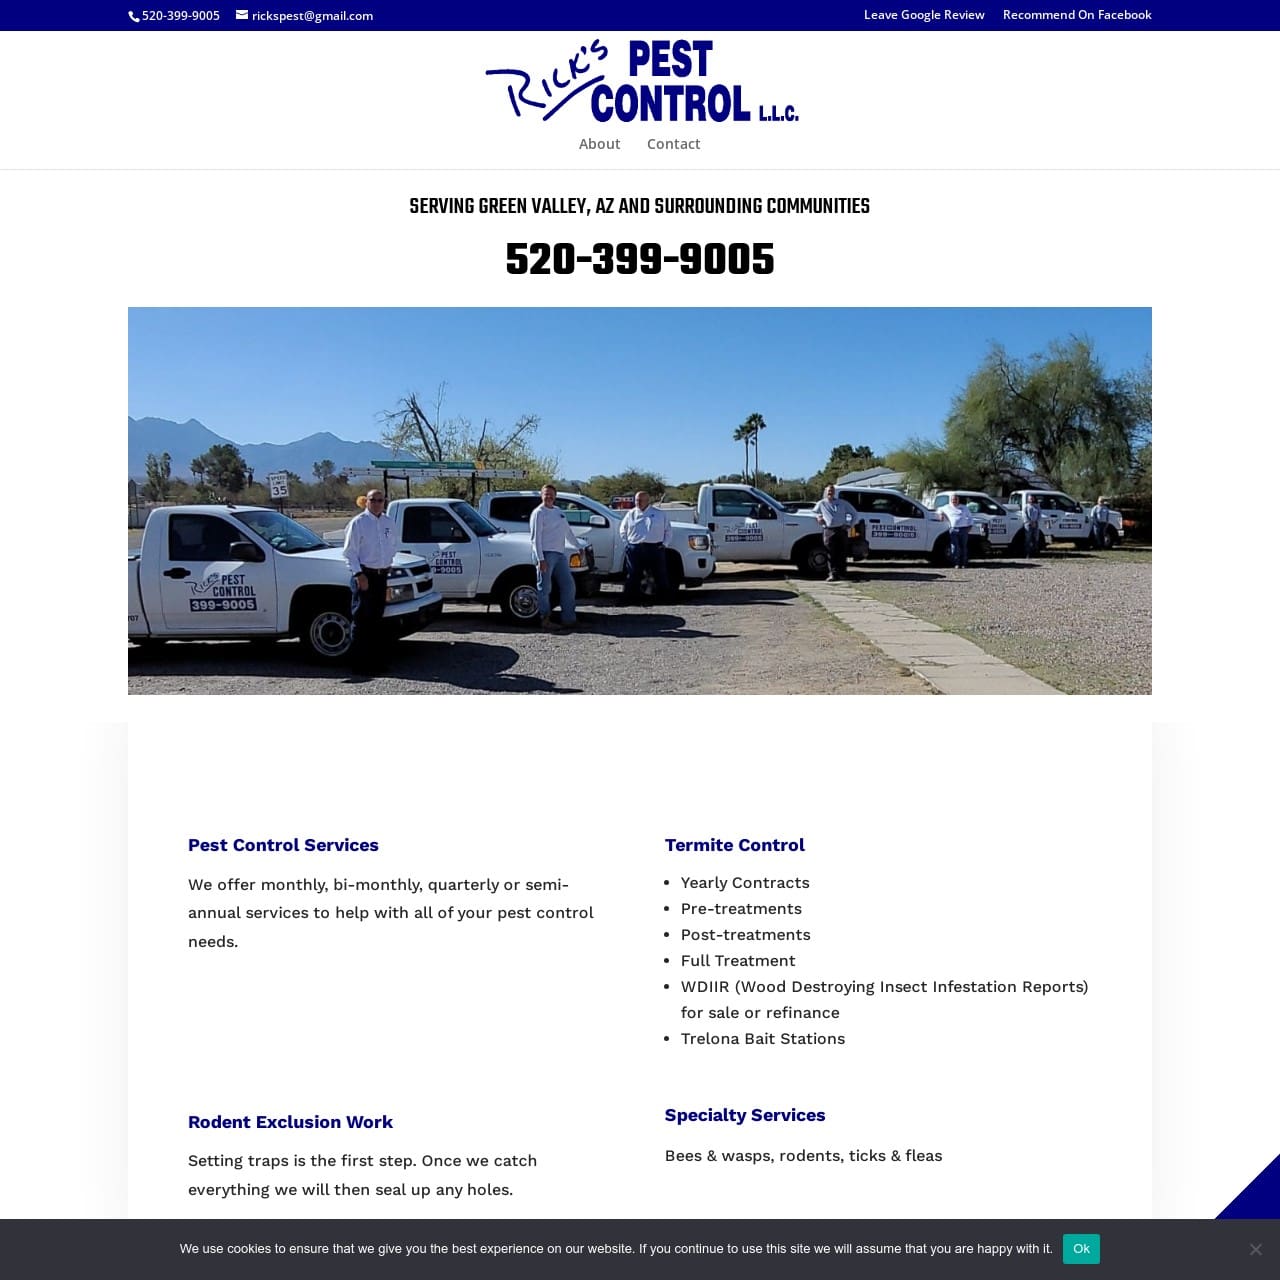 Unleash the power of over 30 years of expertise as Rick's Pest Control AZ partners with Shield Bar Marketing to create their first landing page and set up their Google My Business profile, providing reliable pest control services recommended by local businesses.